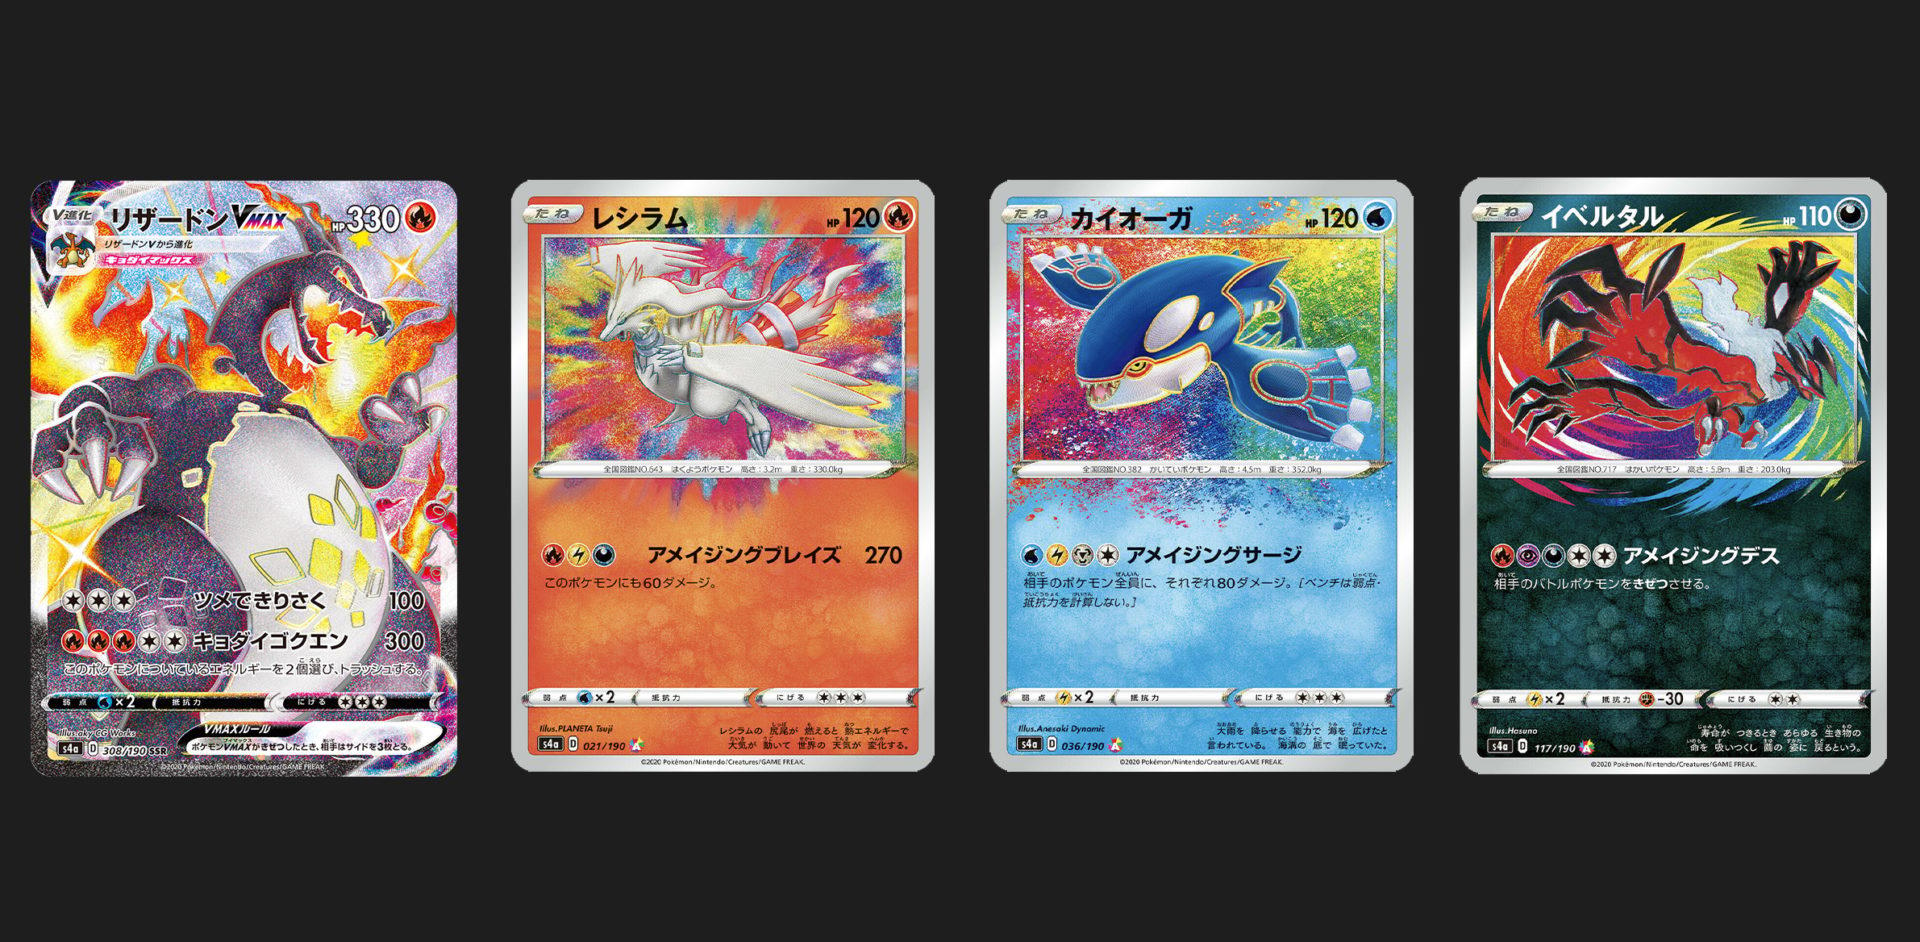 Screenshot of Pokemon cards from the 2021 Shining Fates expansion.